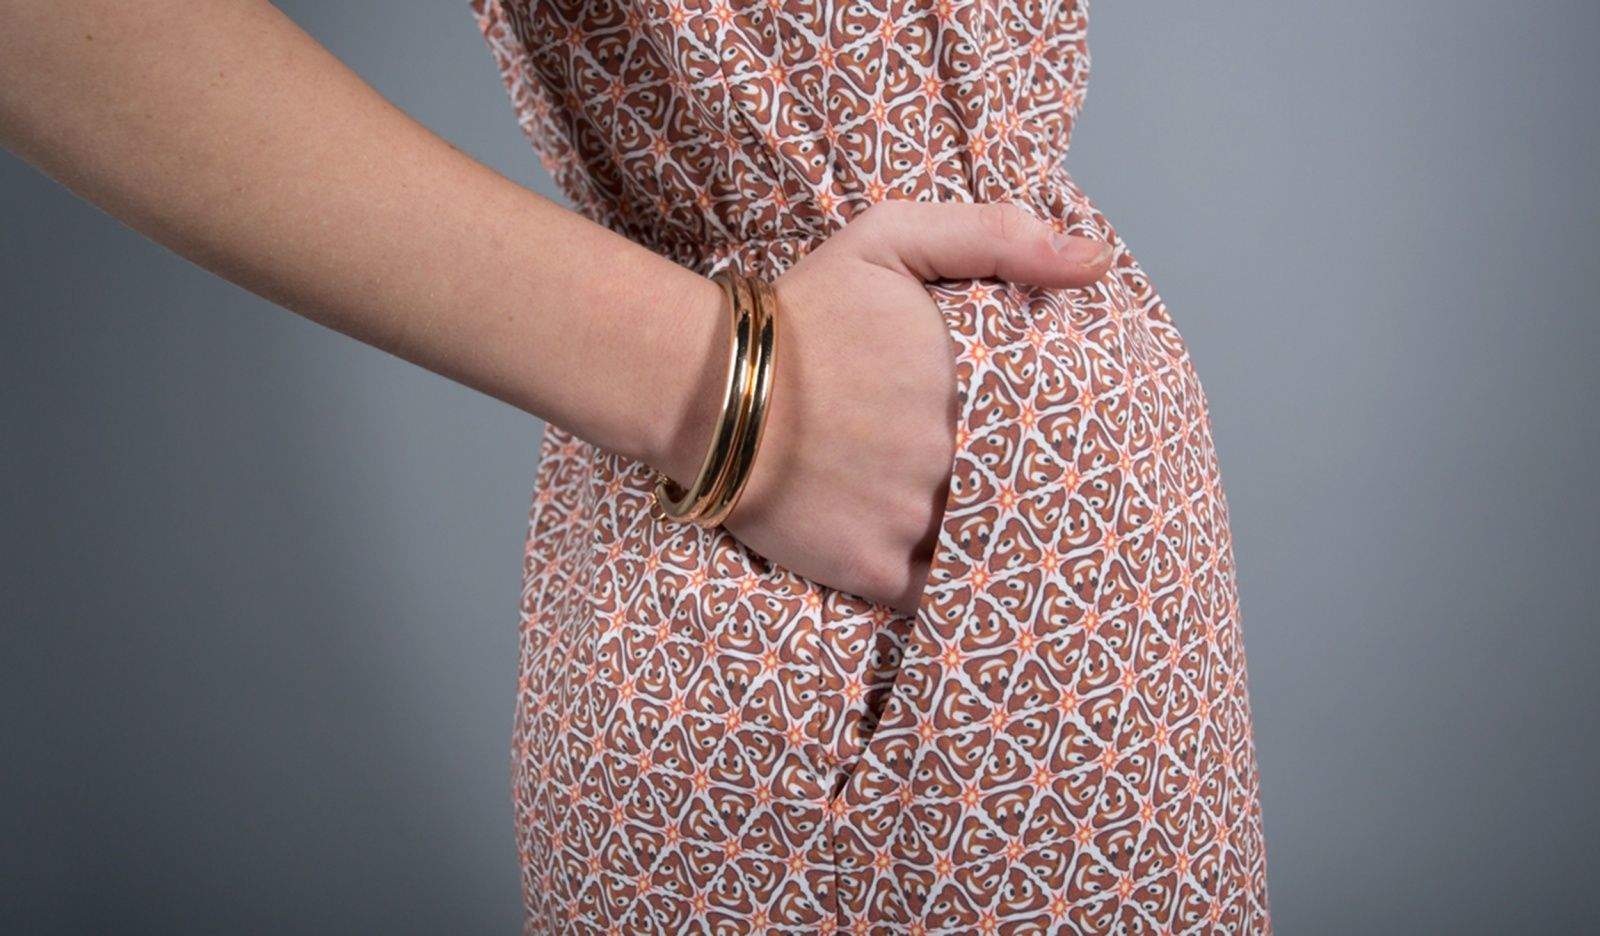 Betabrand latest piece of clothing featuring the Poo Emoji is this pocket dress. Photo: Betabrand